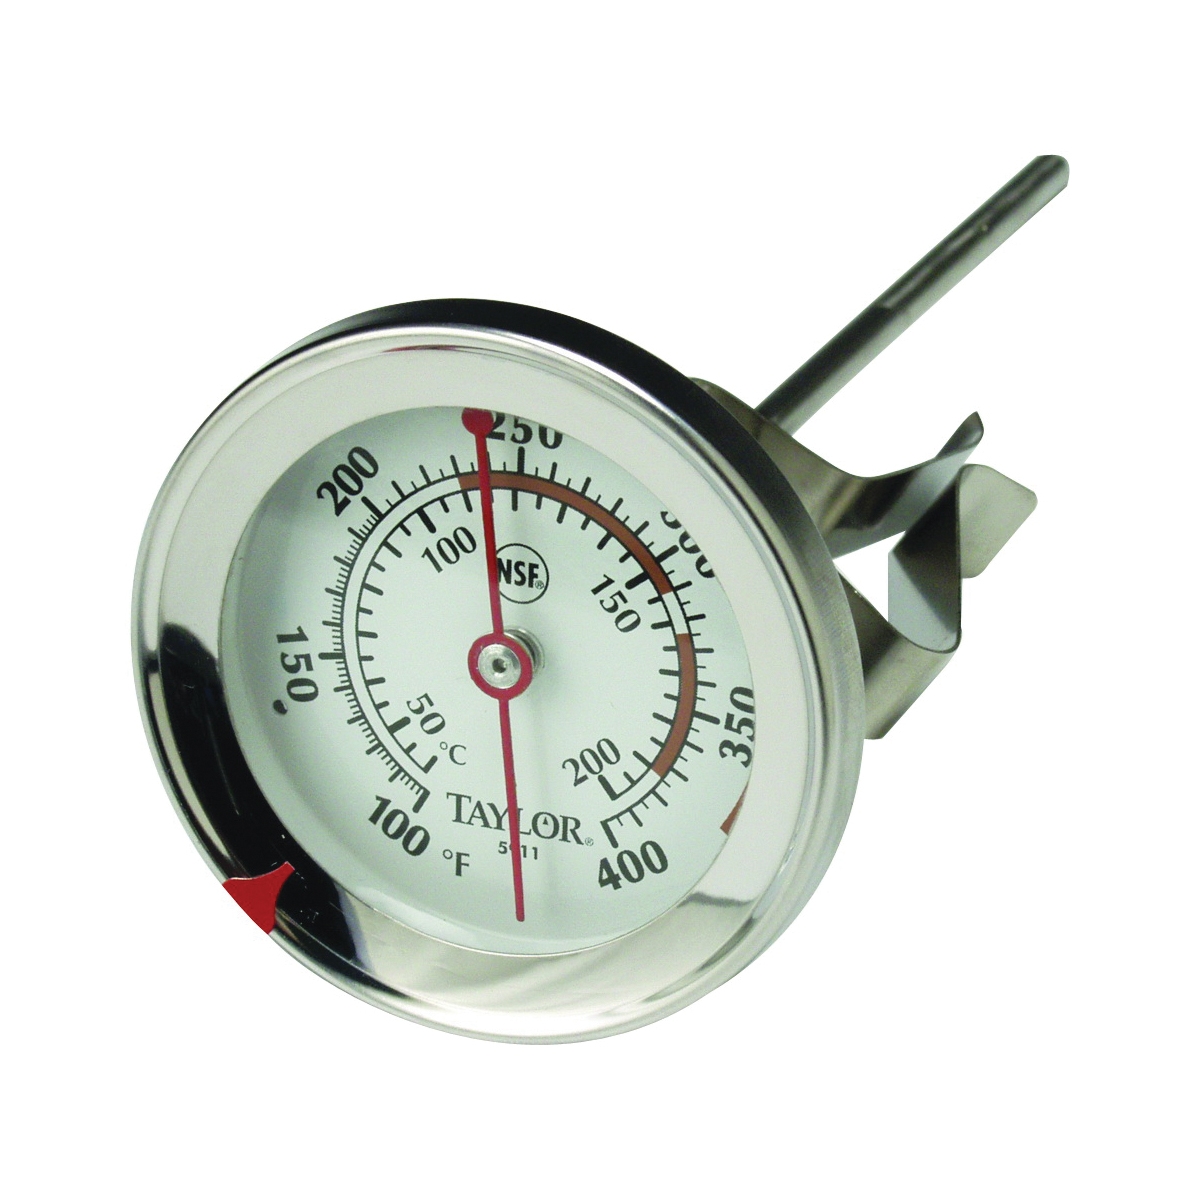 Taylor 5911N Candy/Deep Fry Thermometer, 100 to 400 deg F